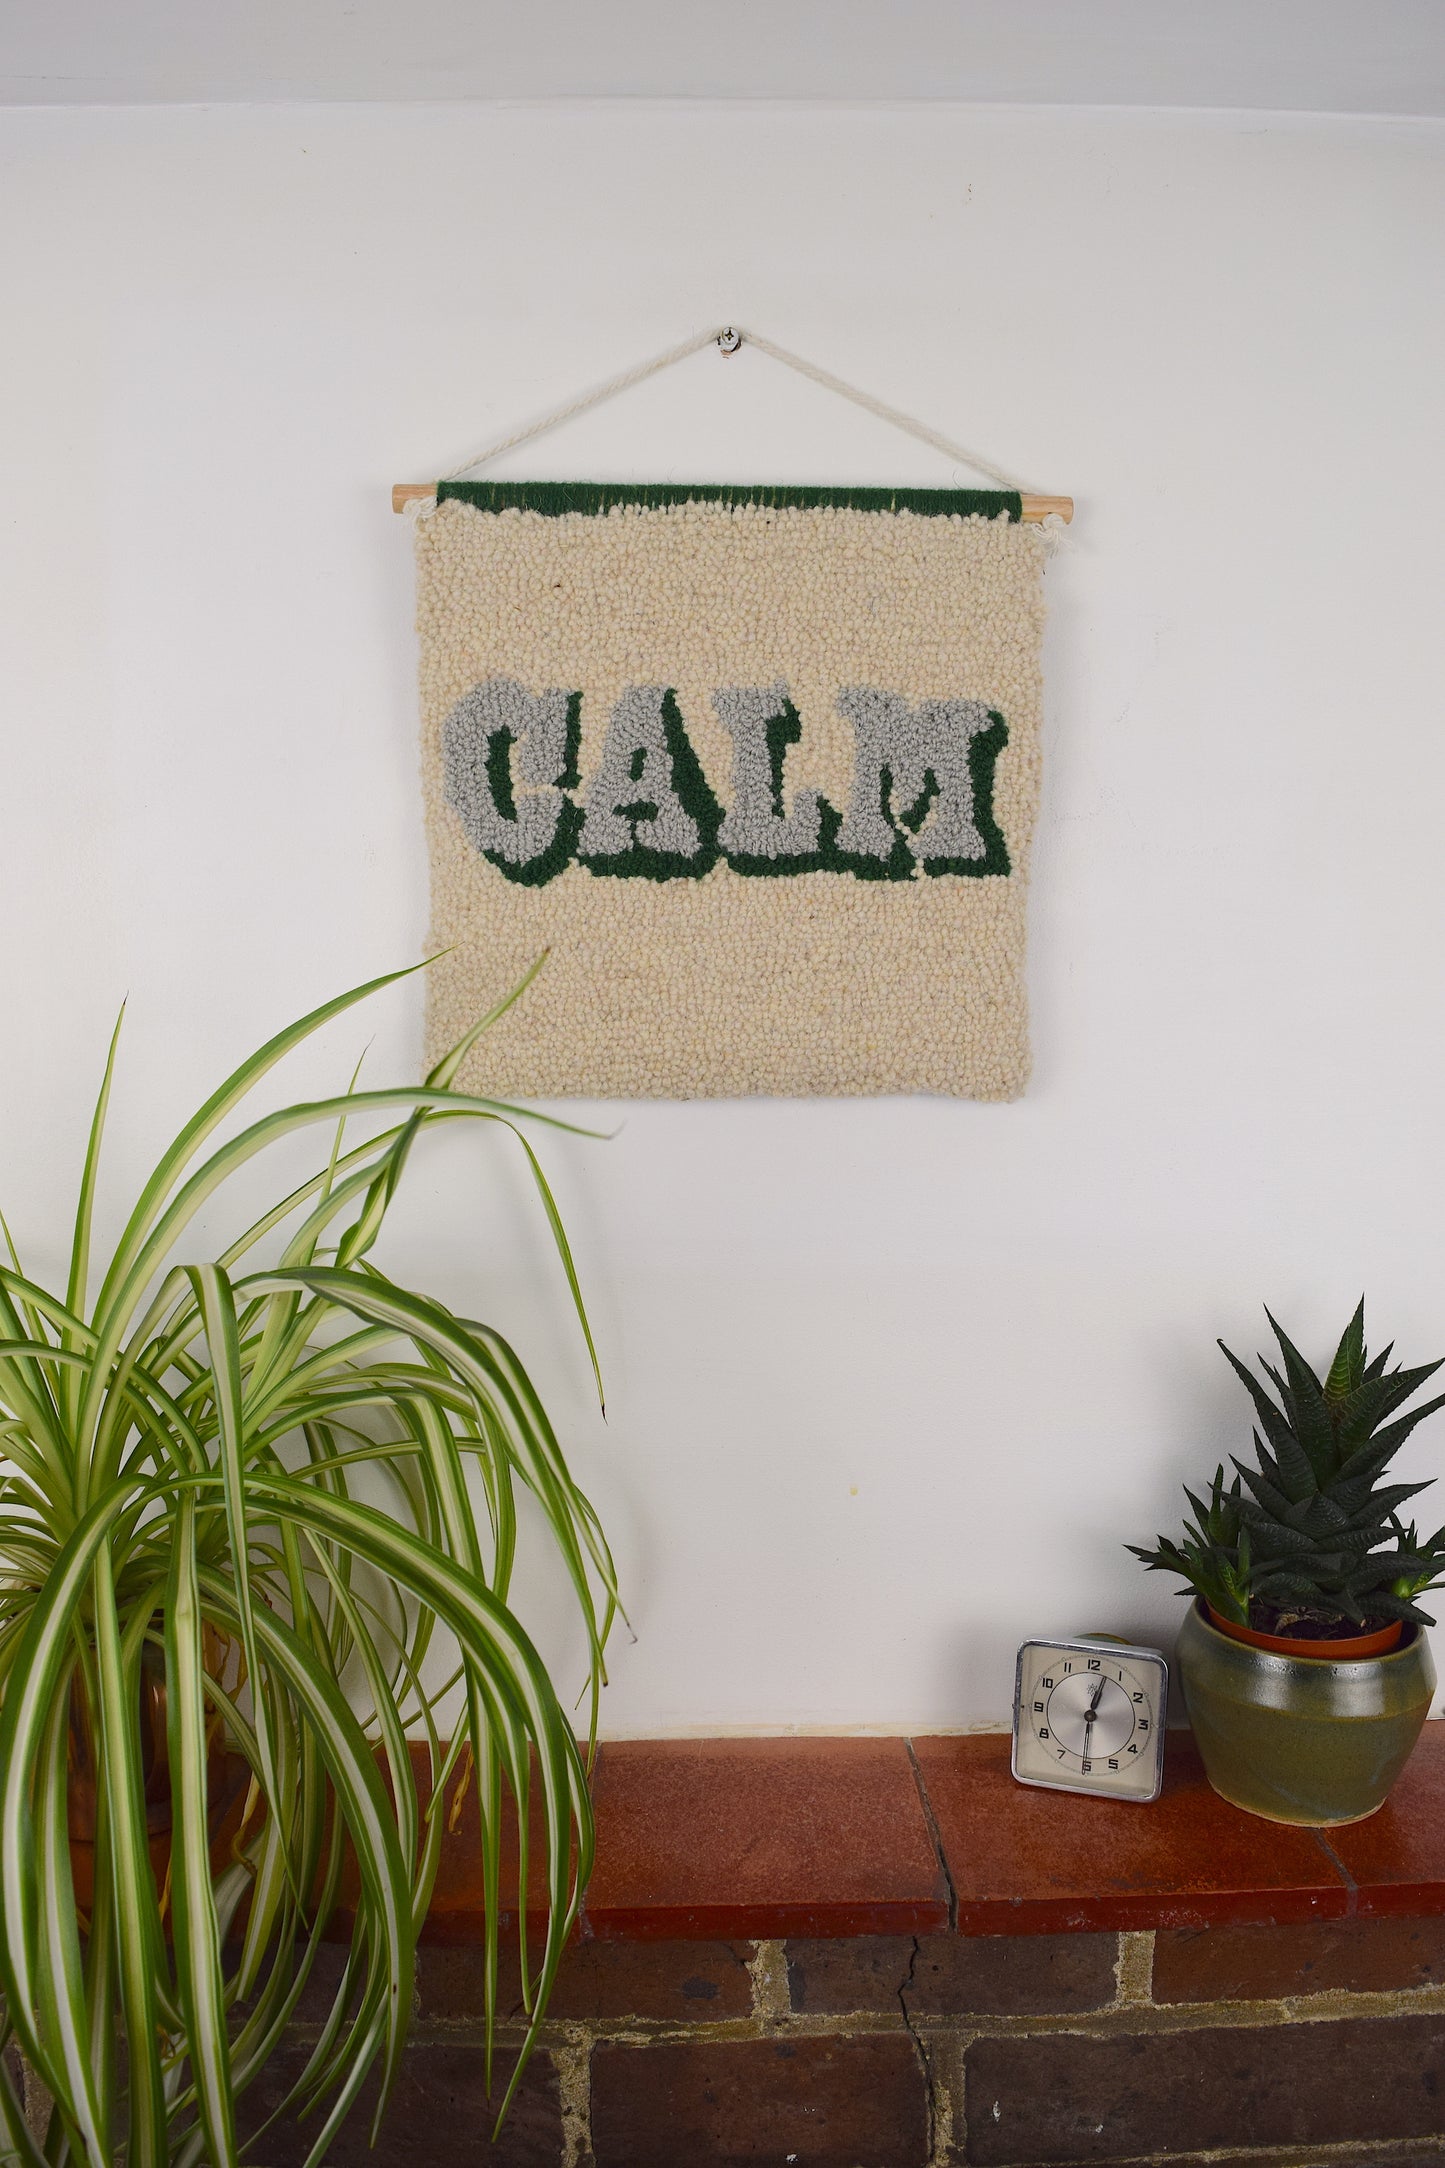 A vintage style typography Wall Hanging with the word CALM soft cream, khaki and green in a loop pile tuft using reclaimed yarn styled on a white wall with plants on the shelf below.